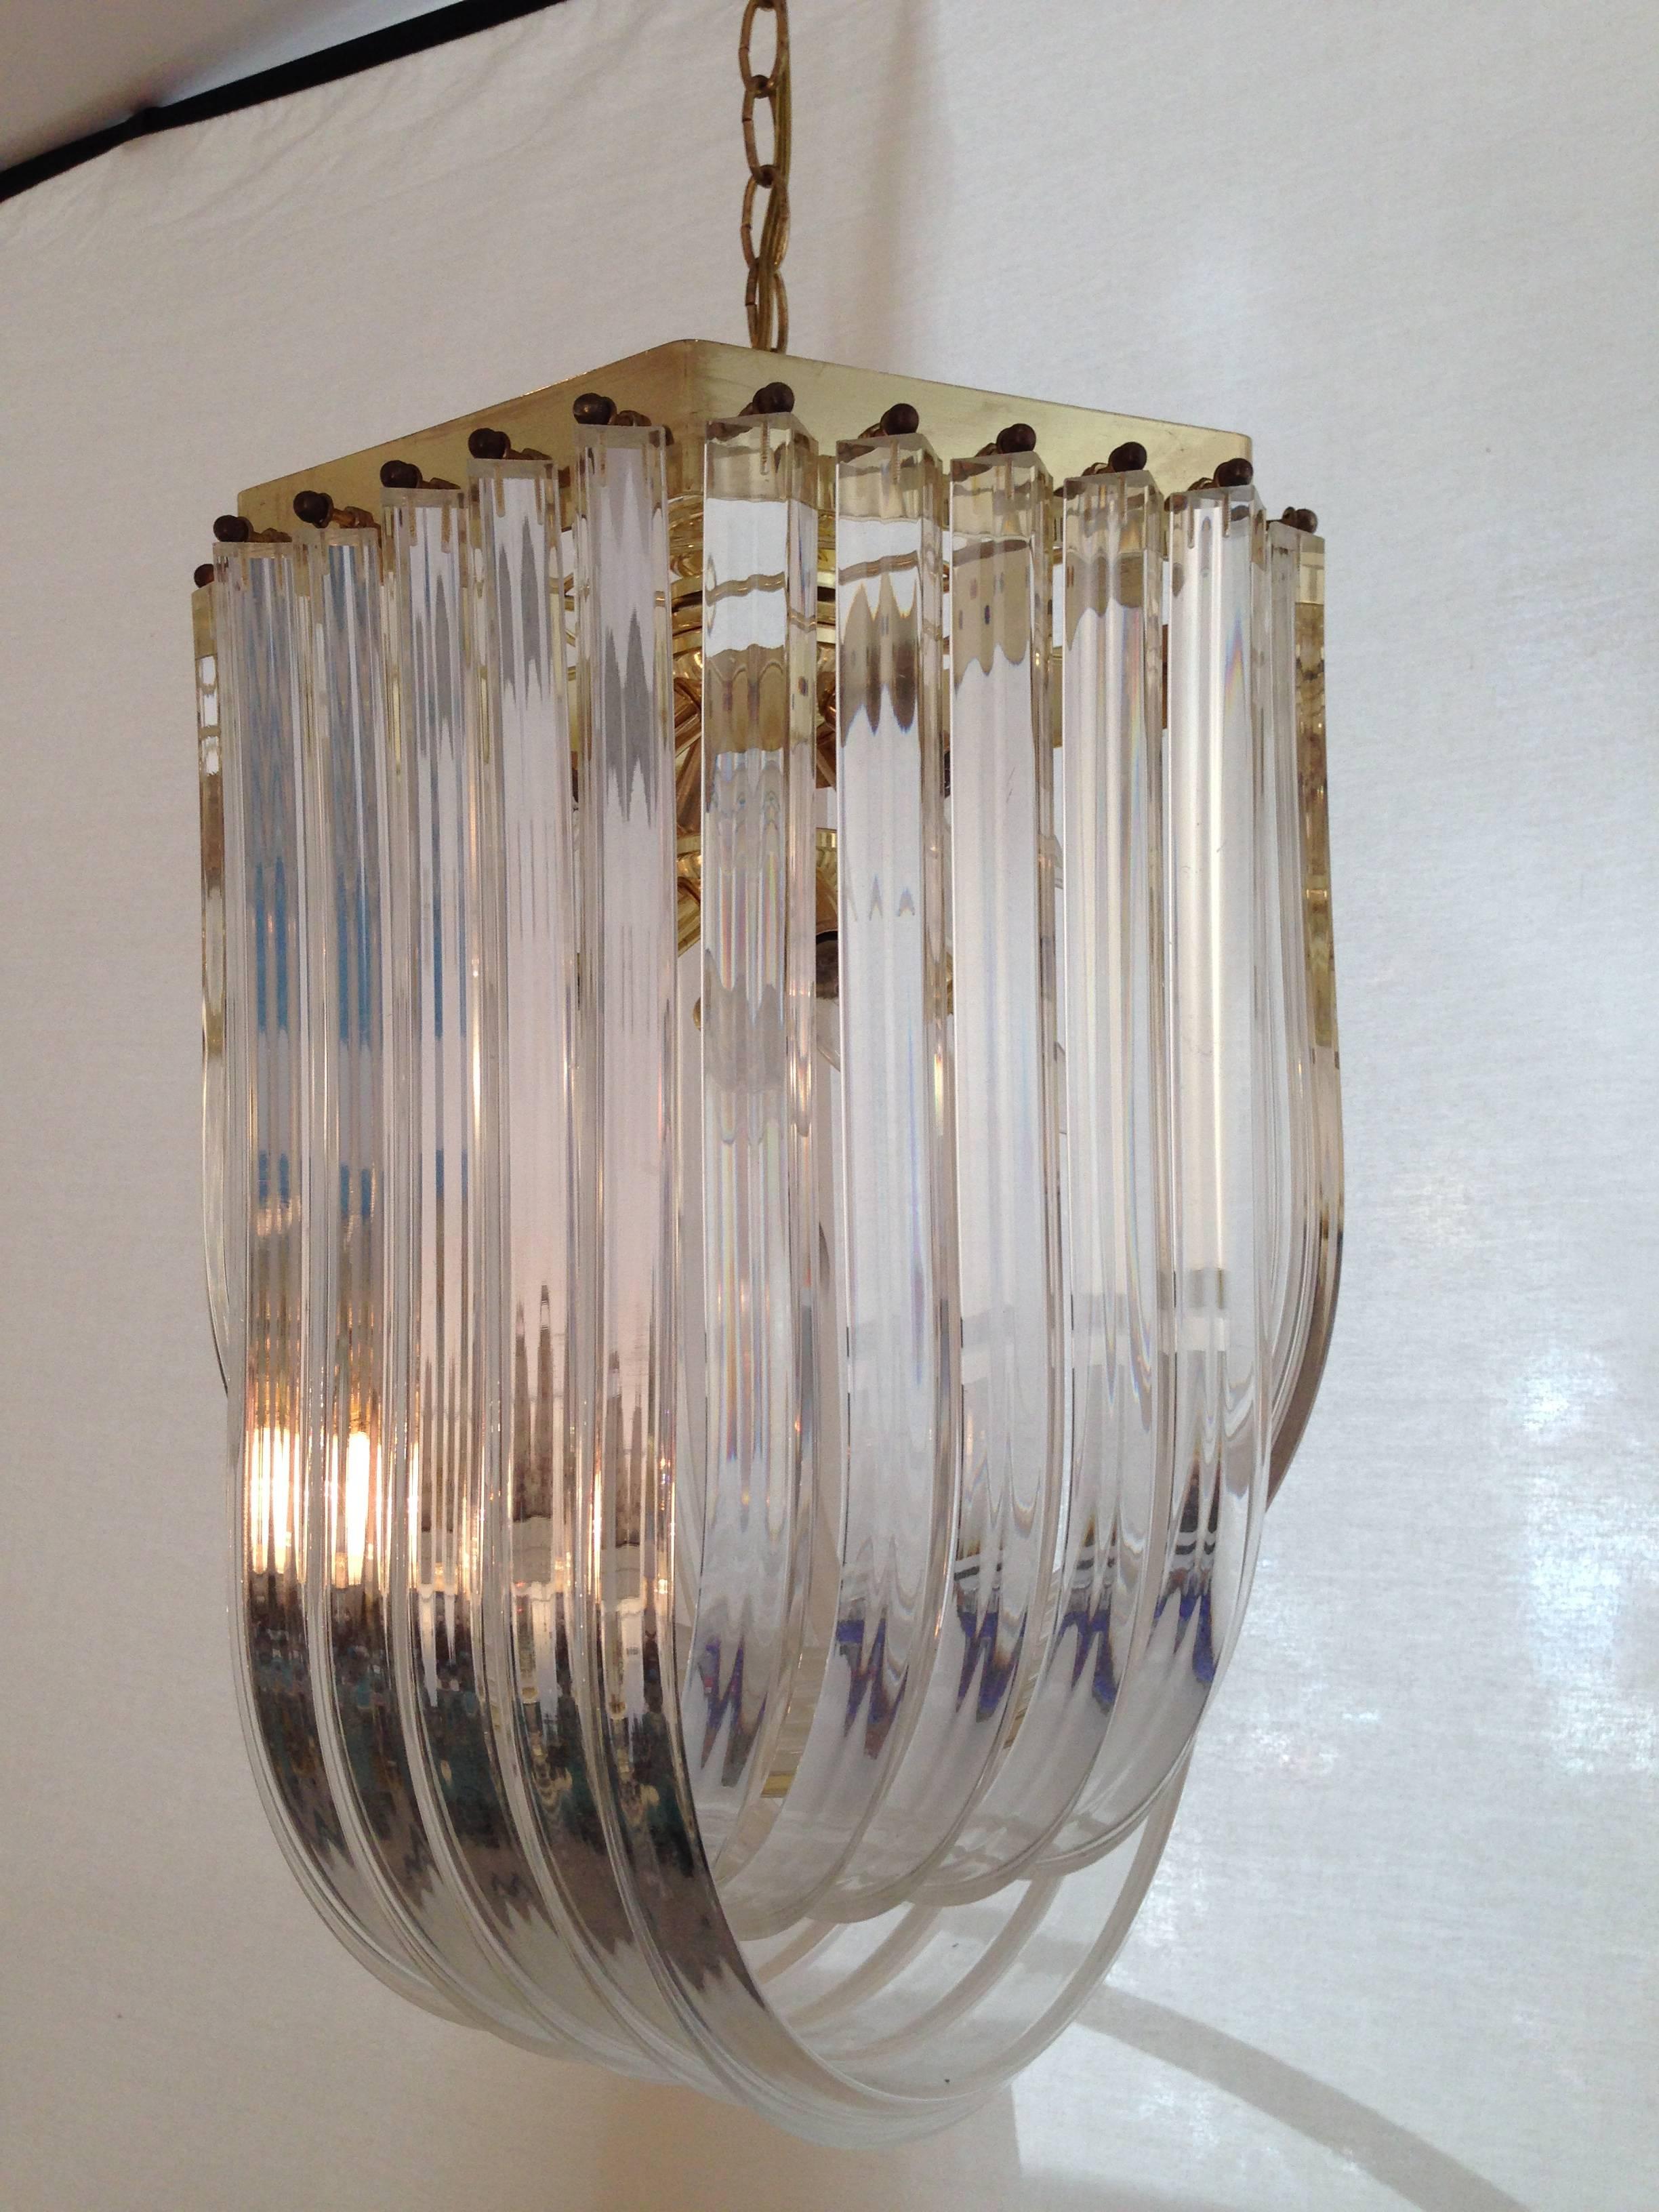 1970s Modern Lucite tube and brass ribbon swag chandelier. Includes 19" L brass link chain. Wired for the US and in working order. Takes ten 40W-max candelabra style bulbs.